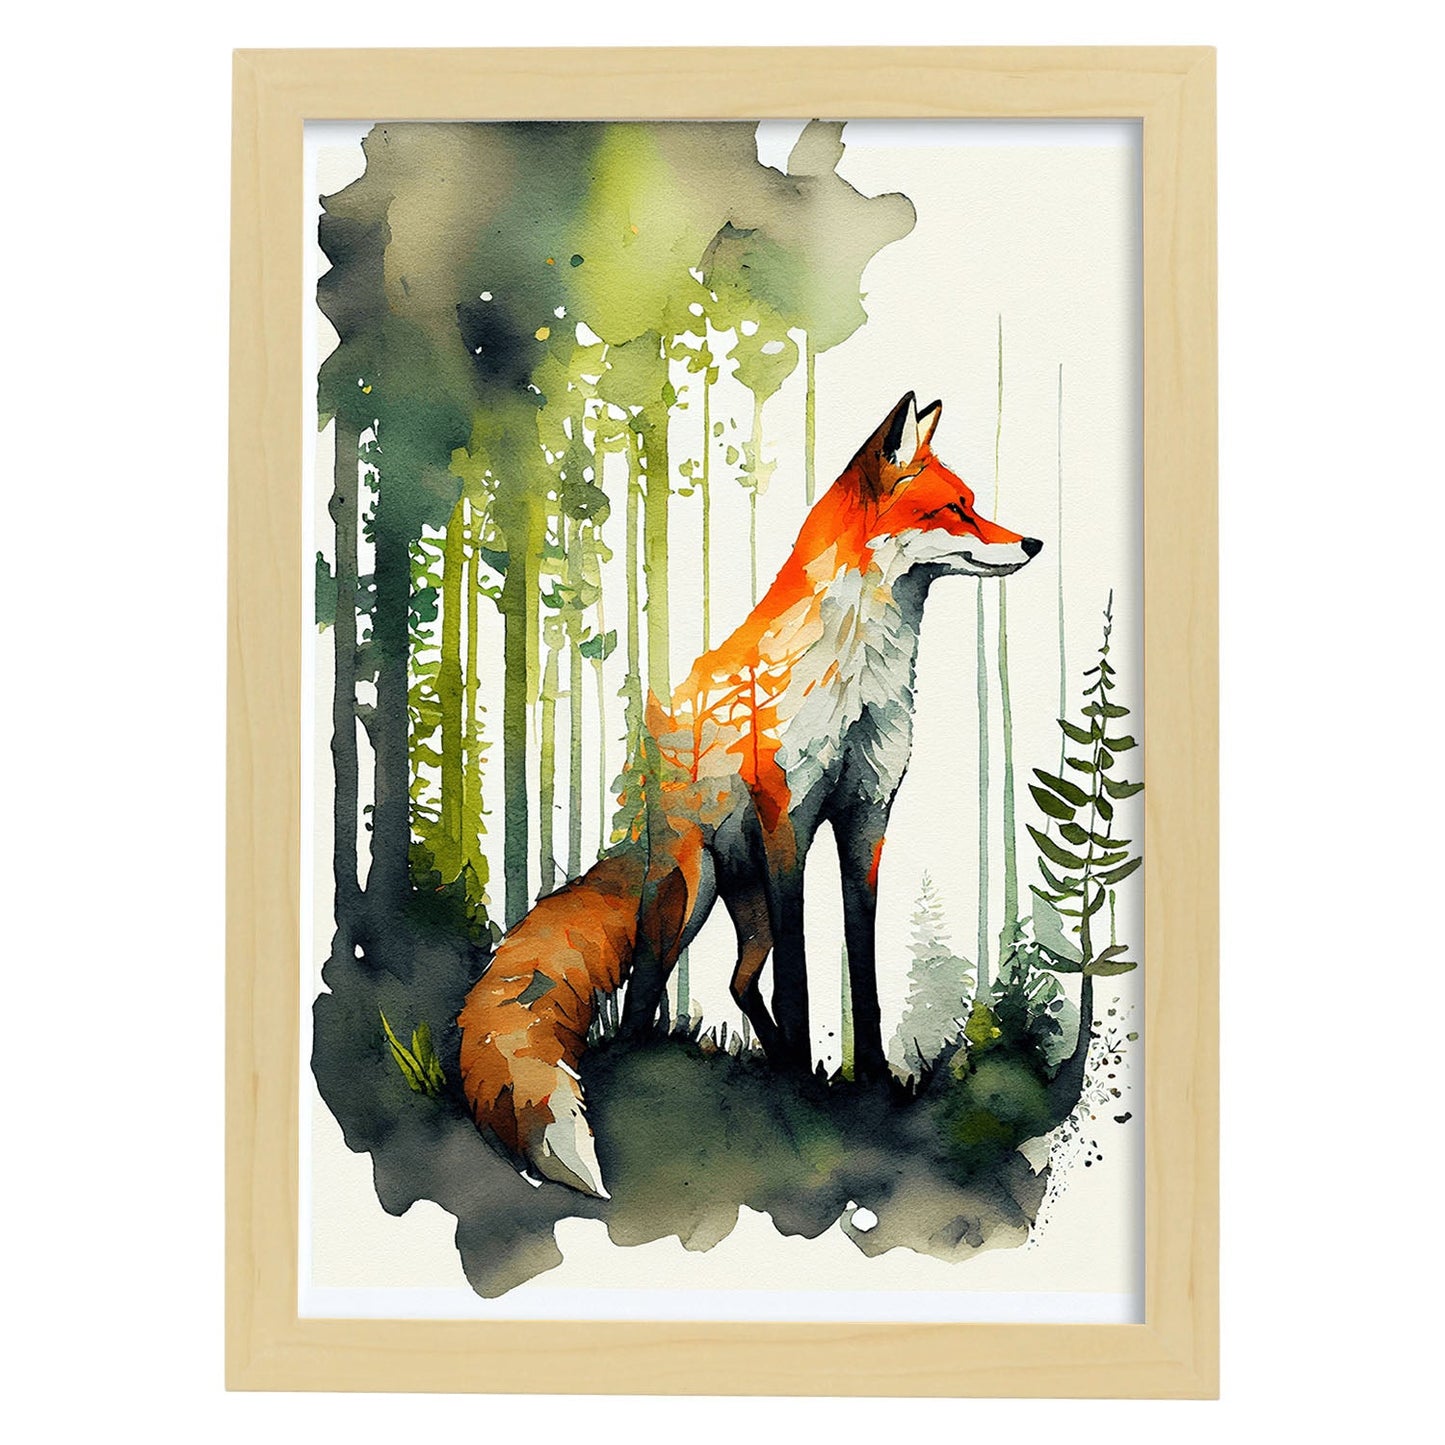 Nacnic Watercolor of Fox in the forest_1. Aesthetic Wall Art Prints for Bedroom or Living Room Design.